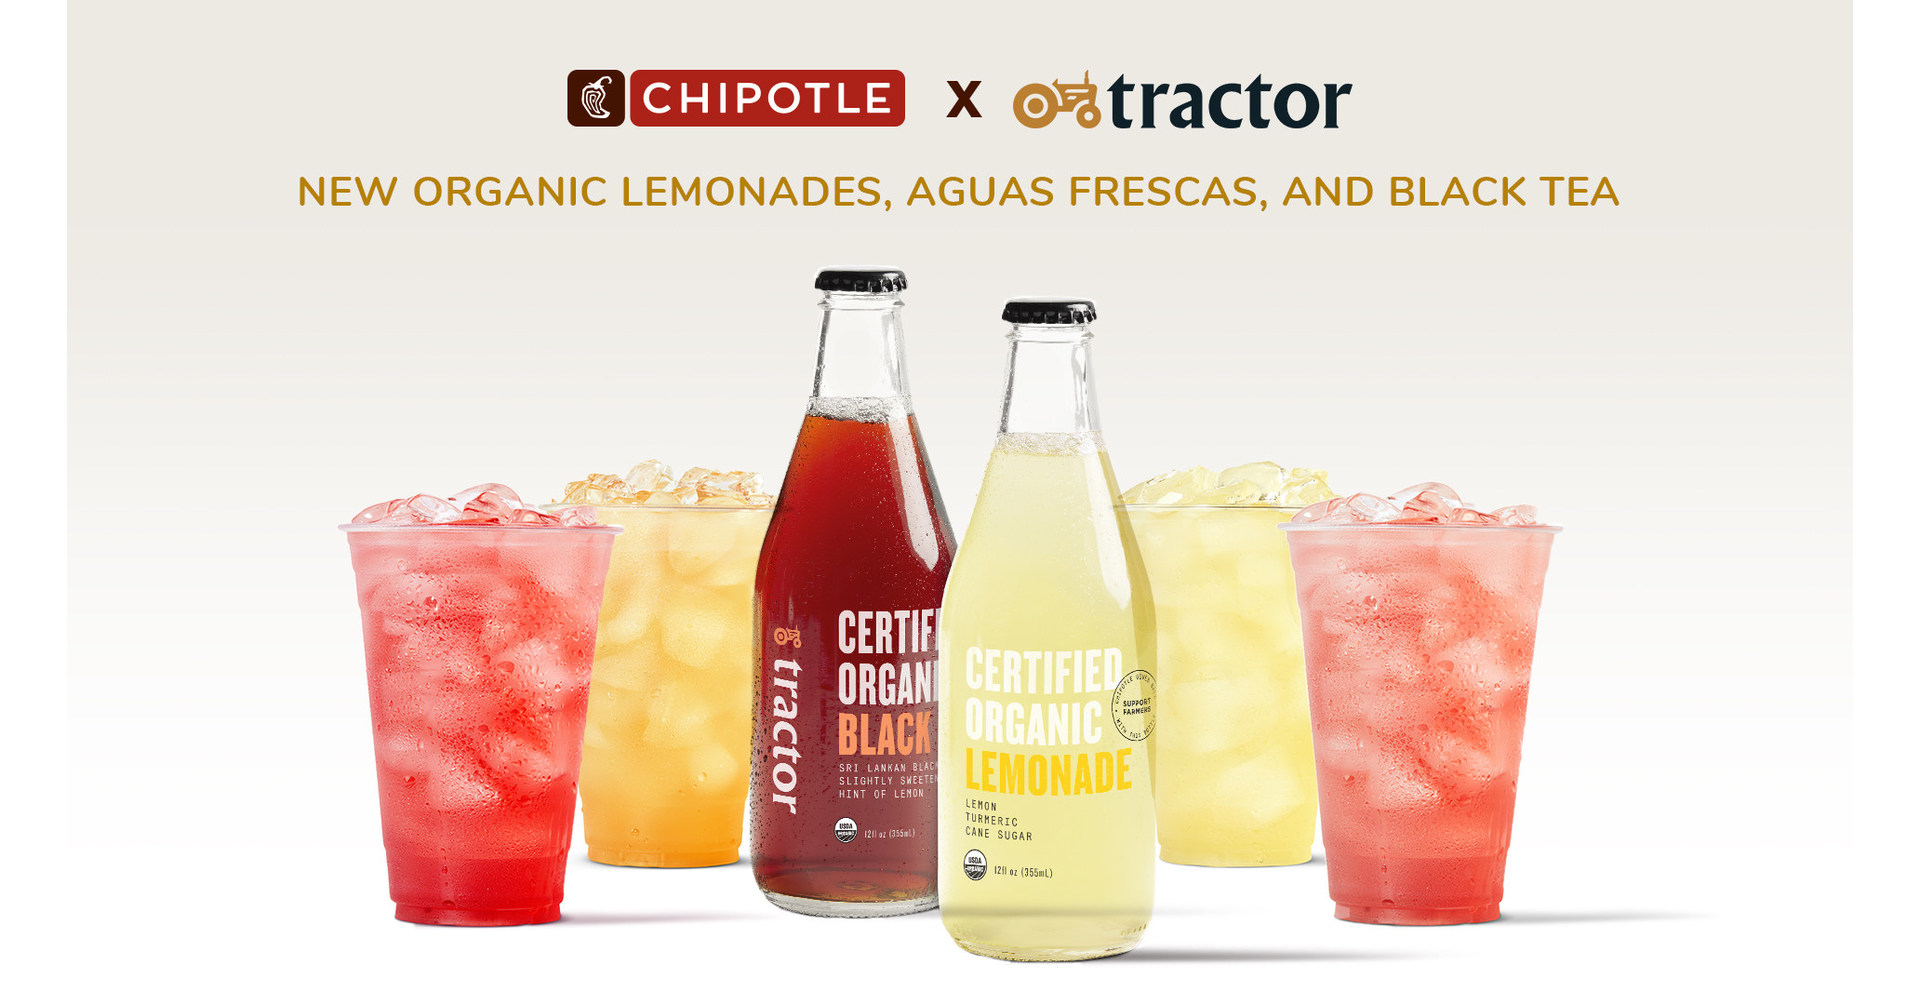 Chipotle Launches New Organic Lemonades, Aguas Frescas And Tea With